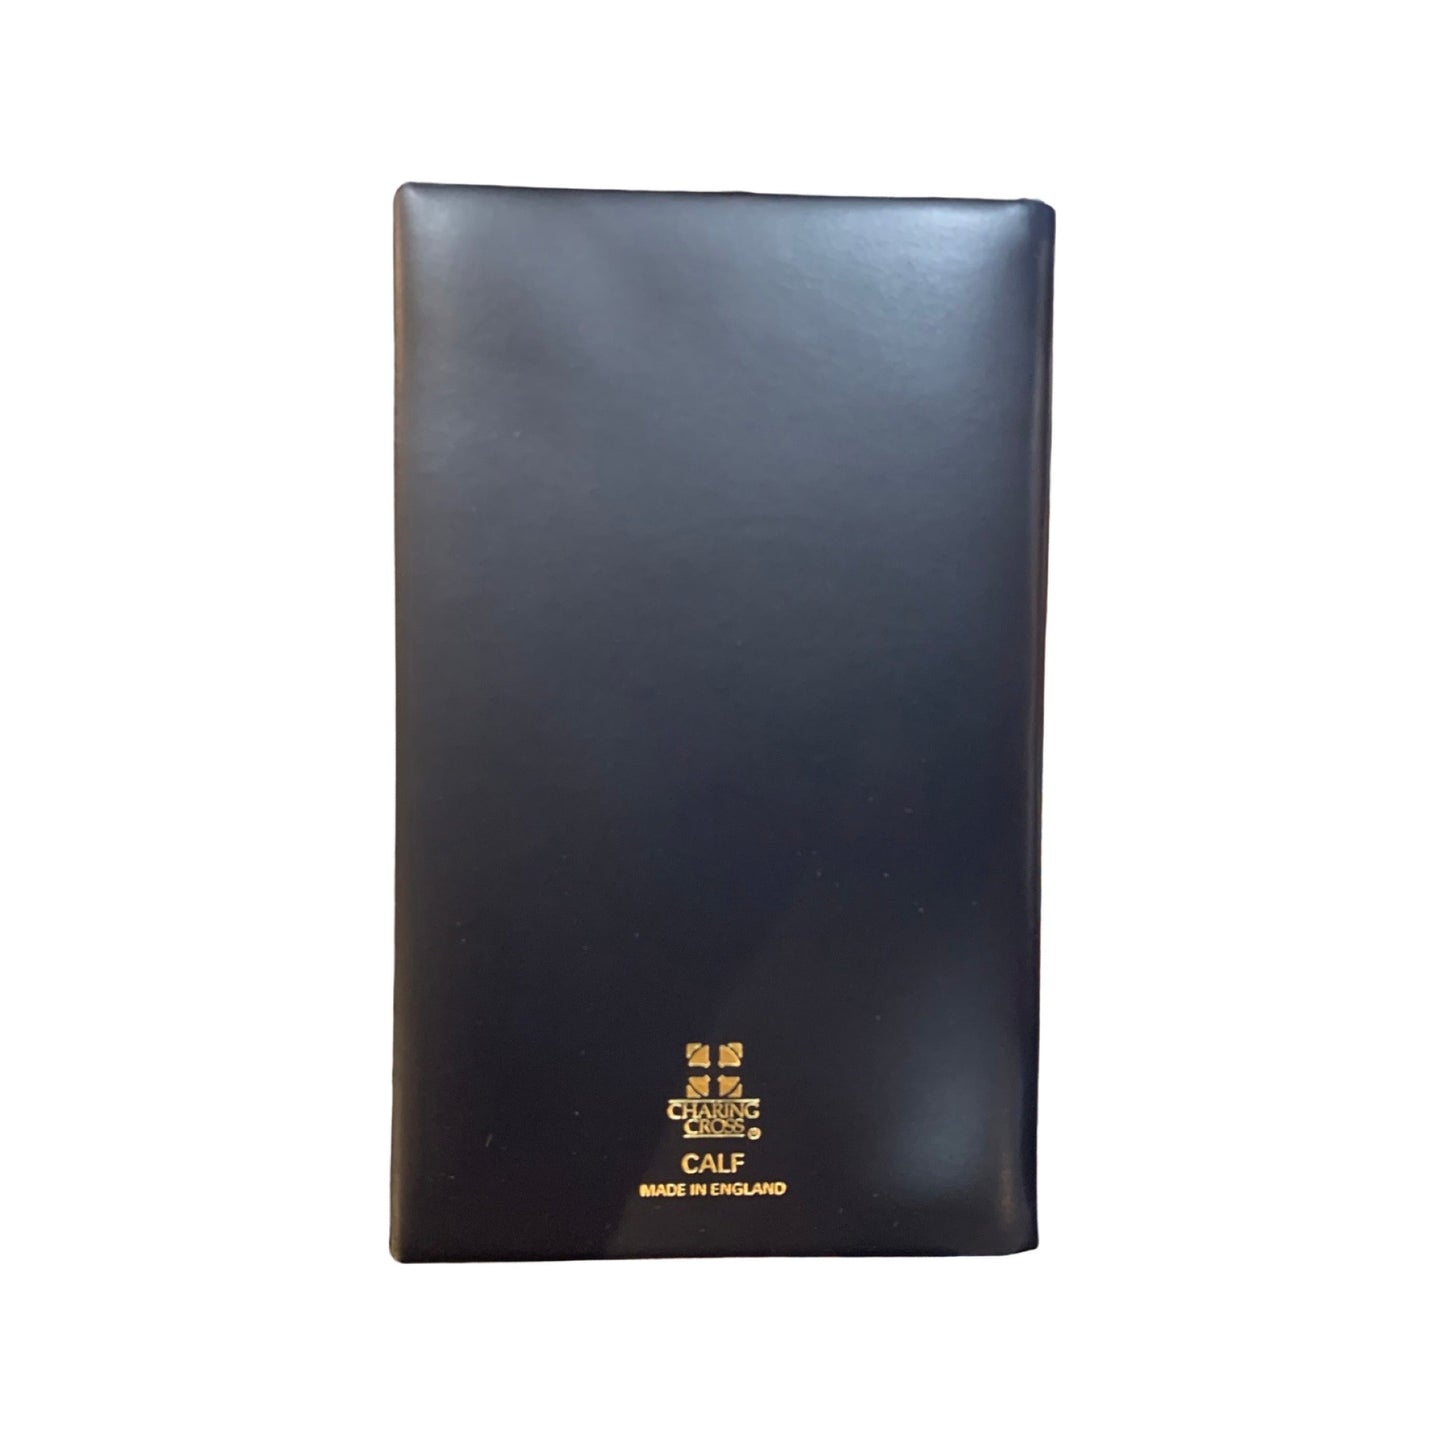 Address Book | 5 by 3 inches | Calf Leather | Made in England | Charing Cross Leather | A53C